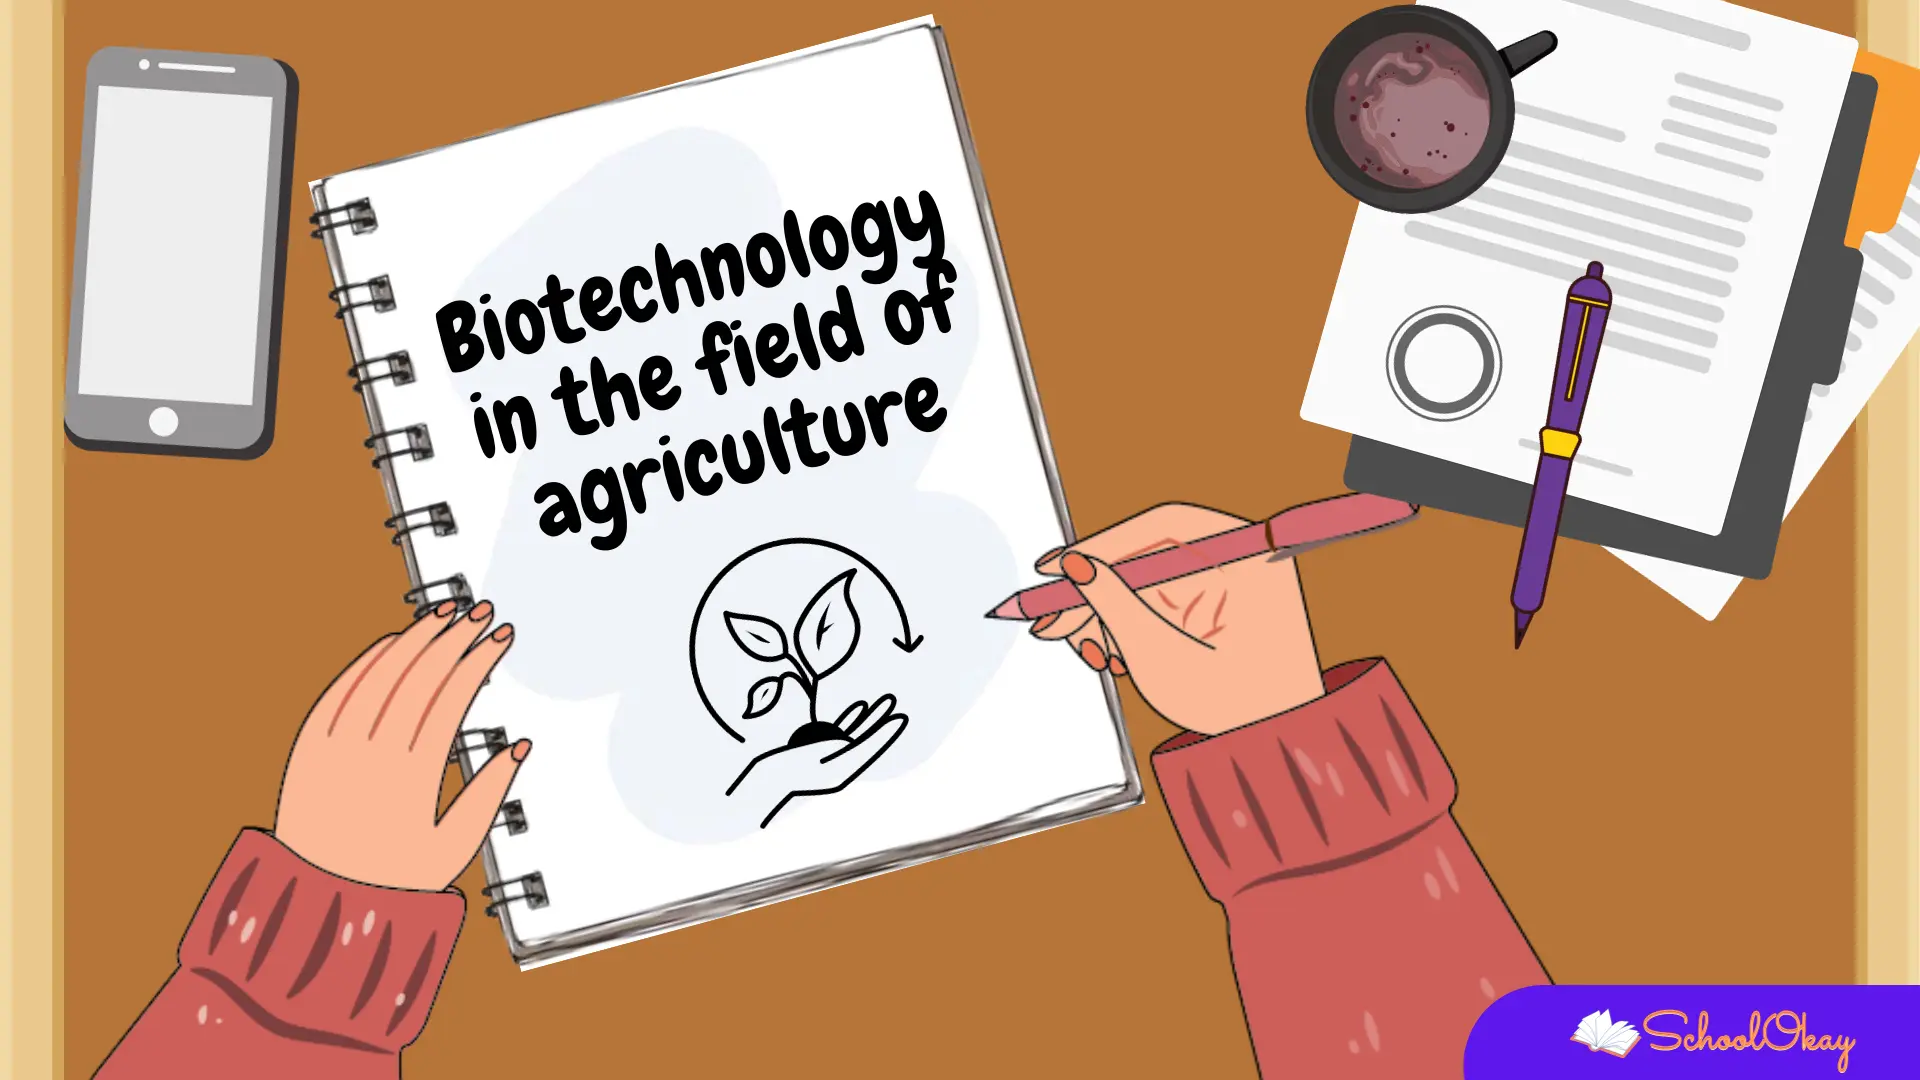 Biotechnology in the field of agriculture 